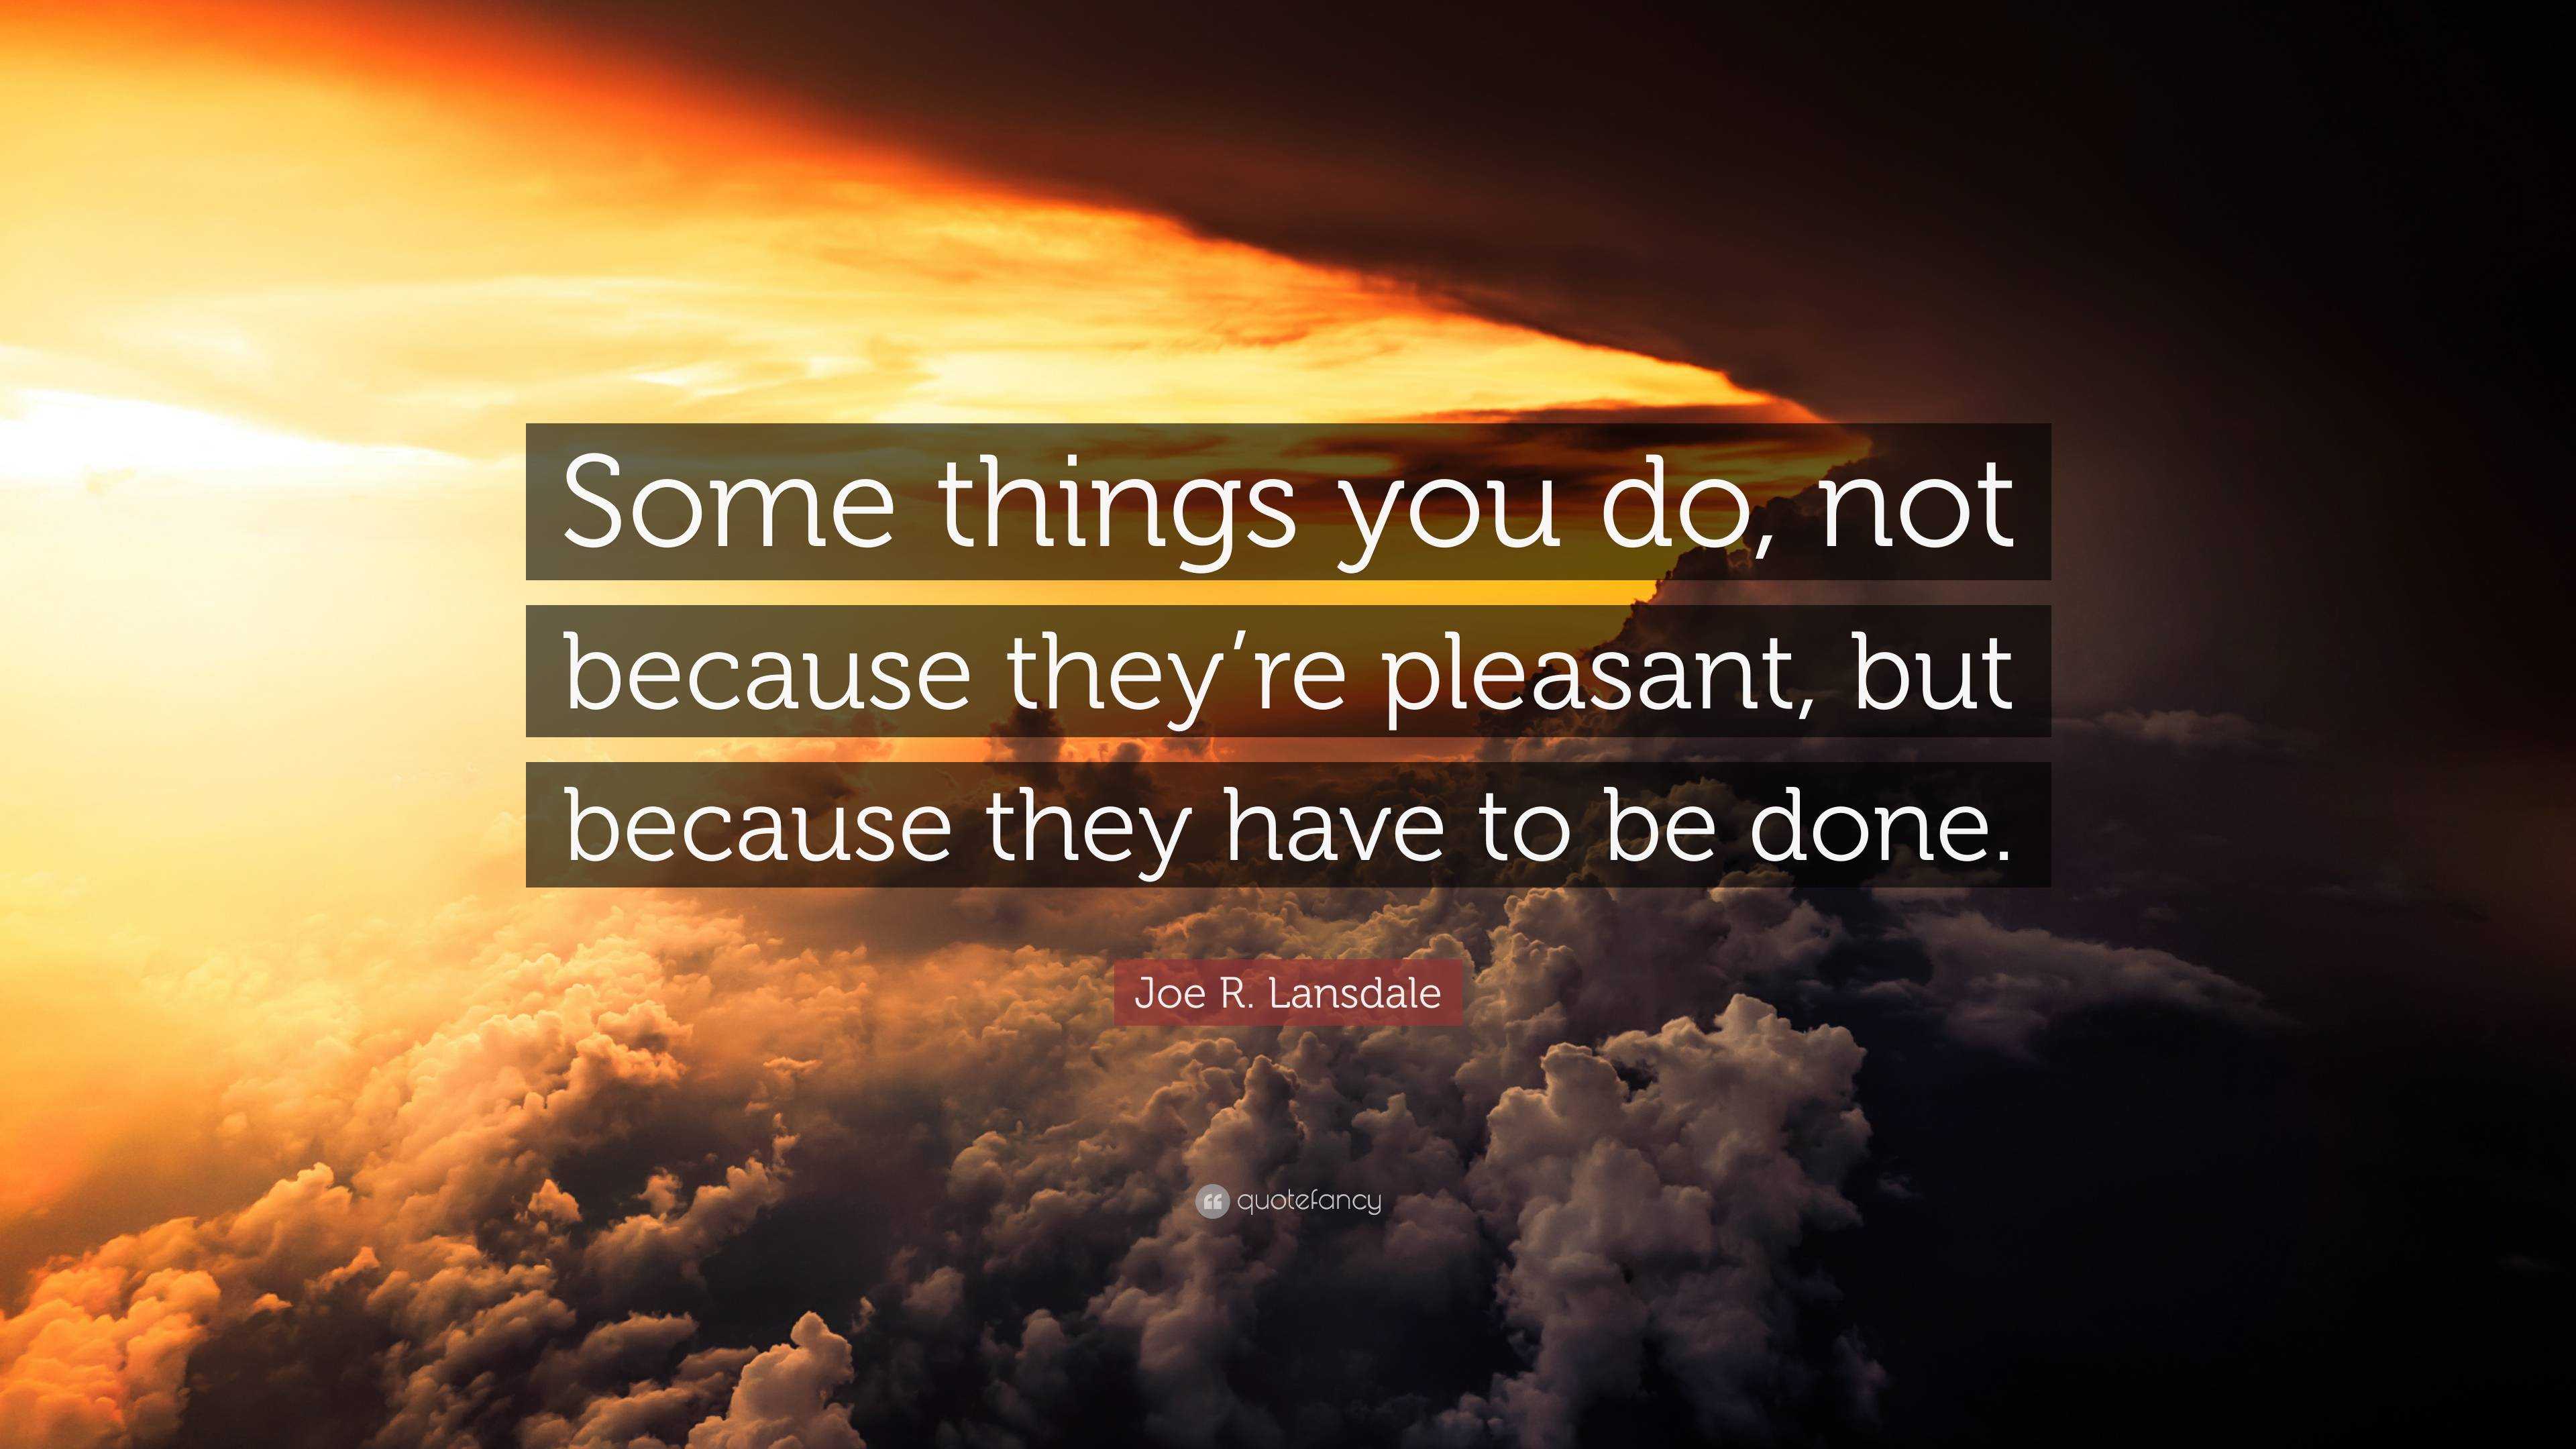 Joe R. Lansdale Quote: “Some things you do, not because they’re ...